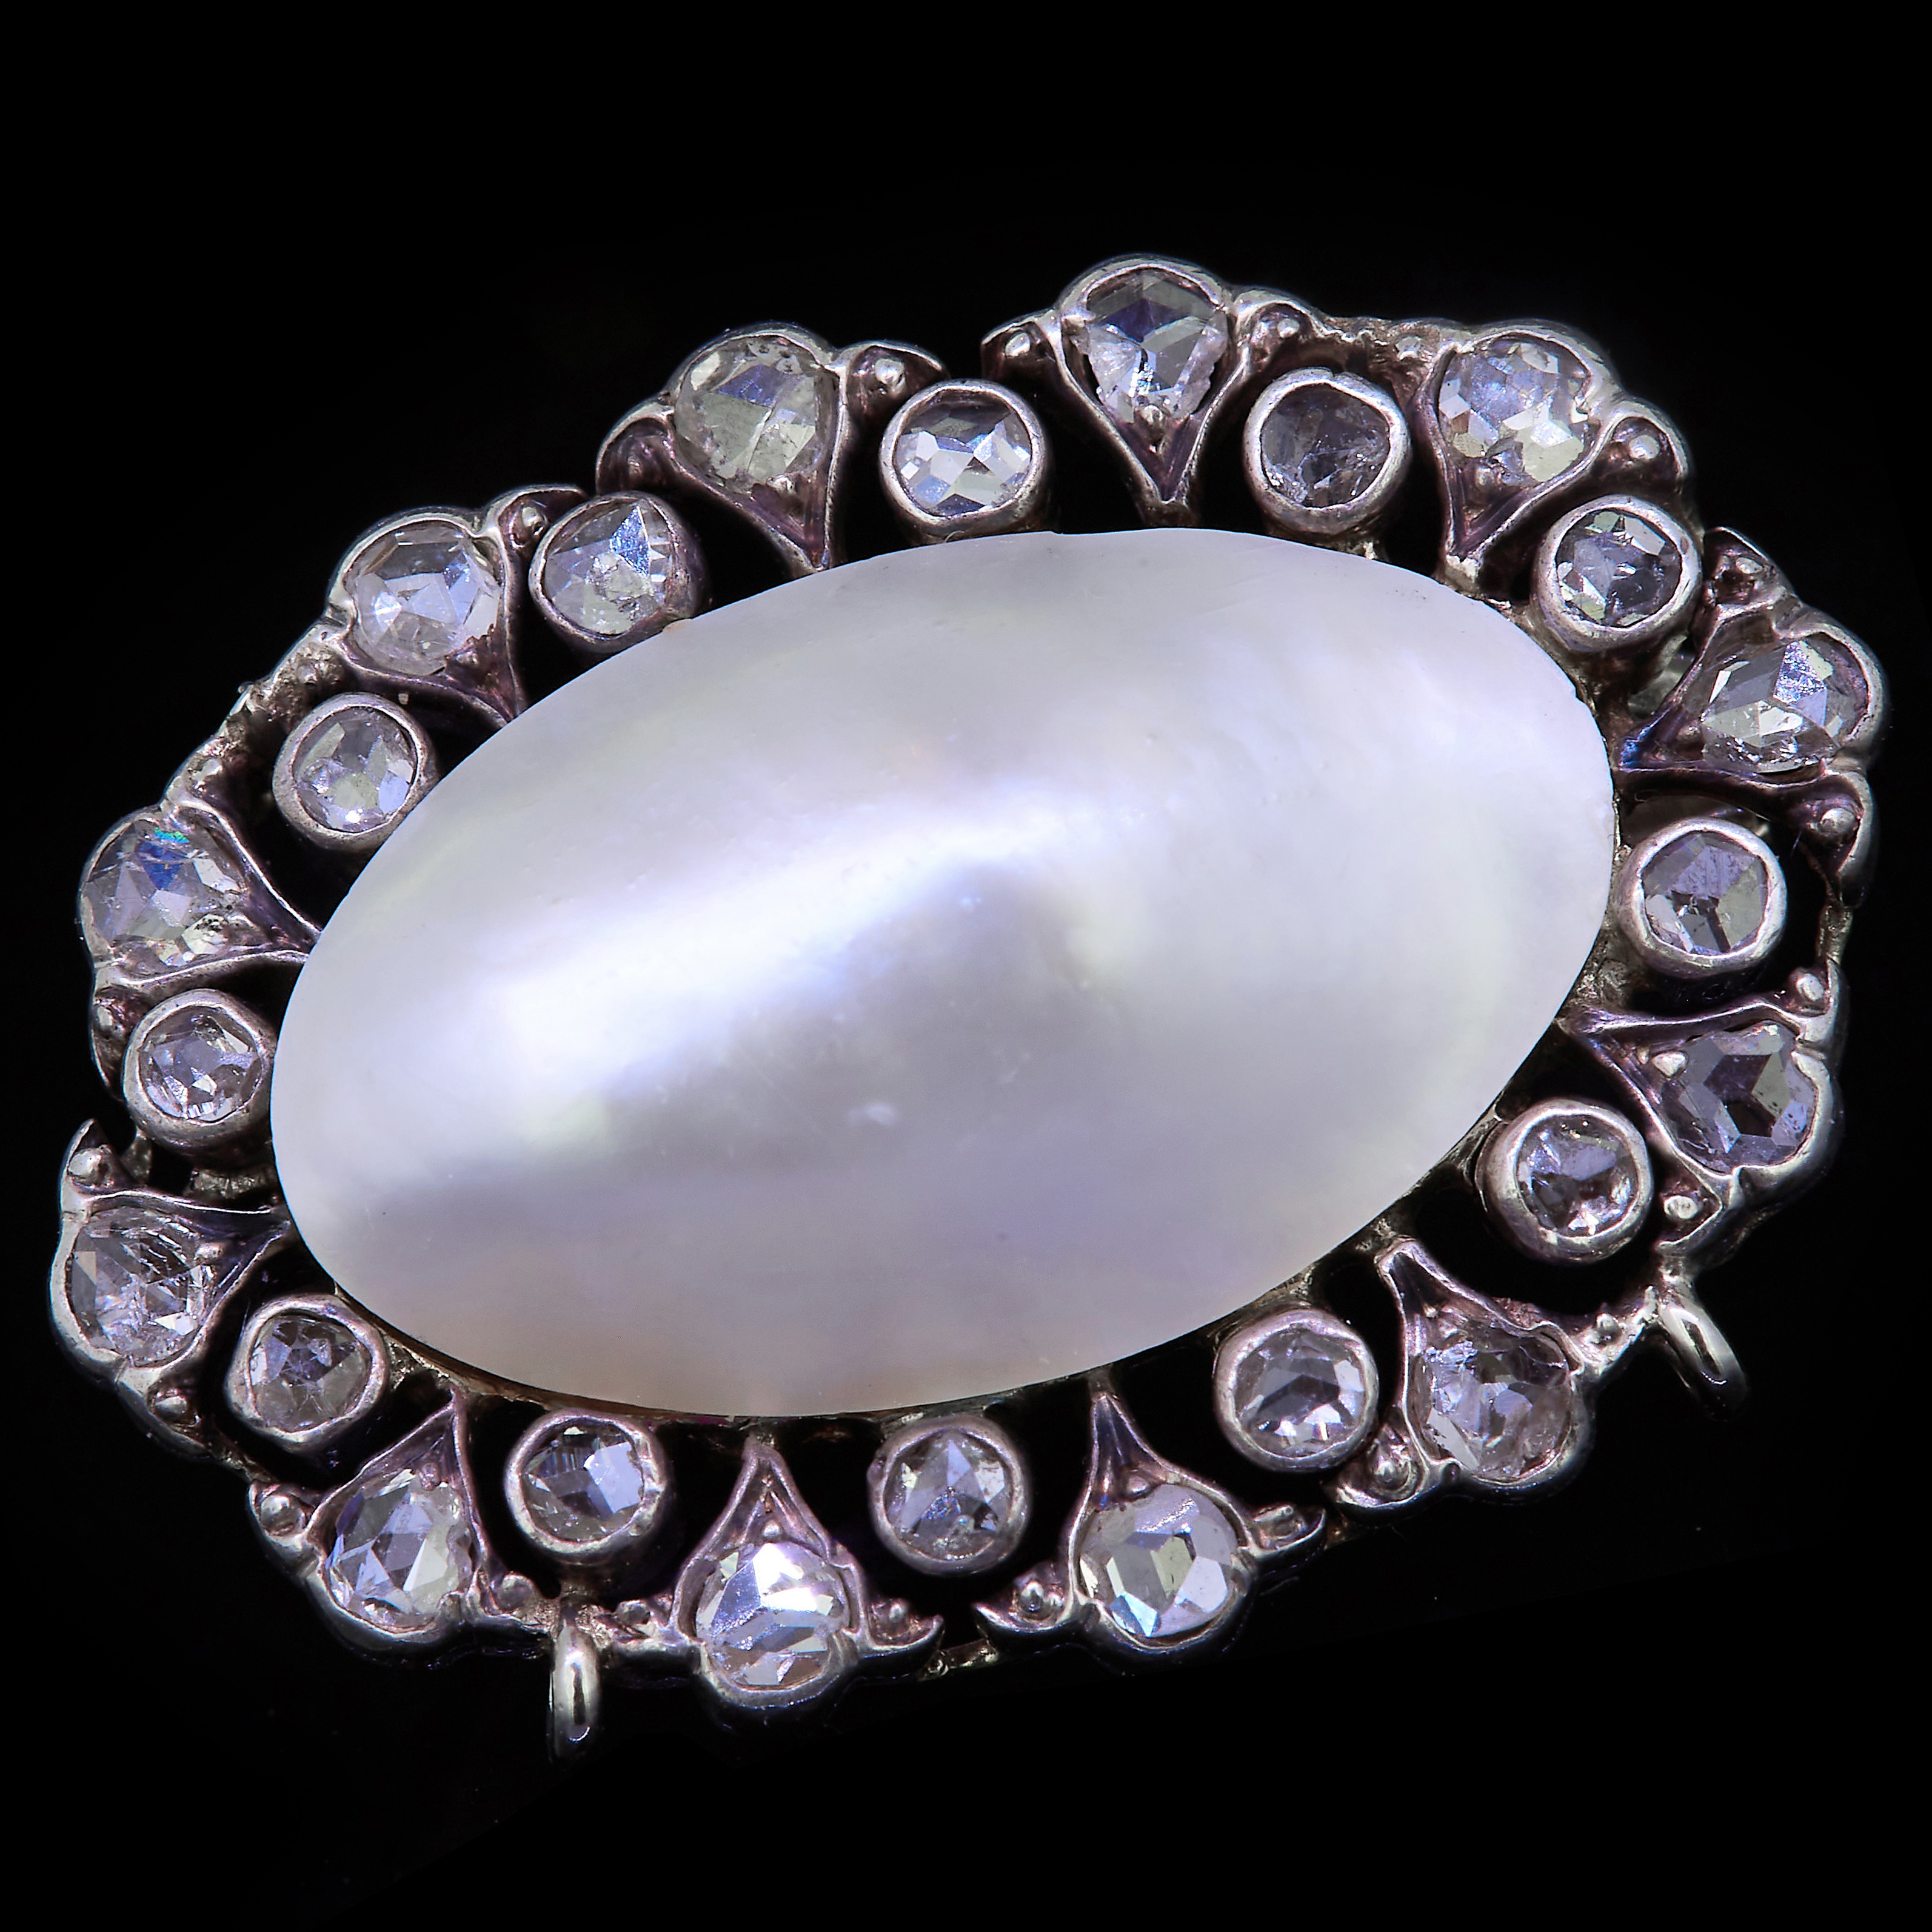 ANTIQUE PEARL AND DIAMOND BROOCH